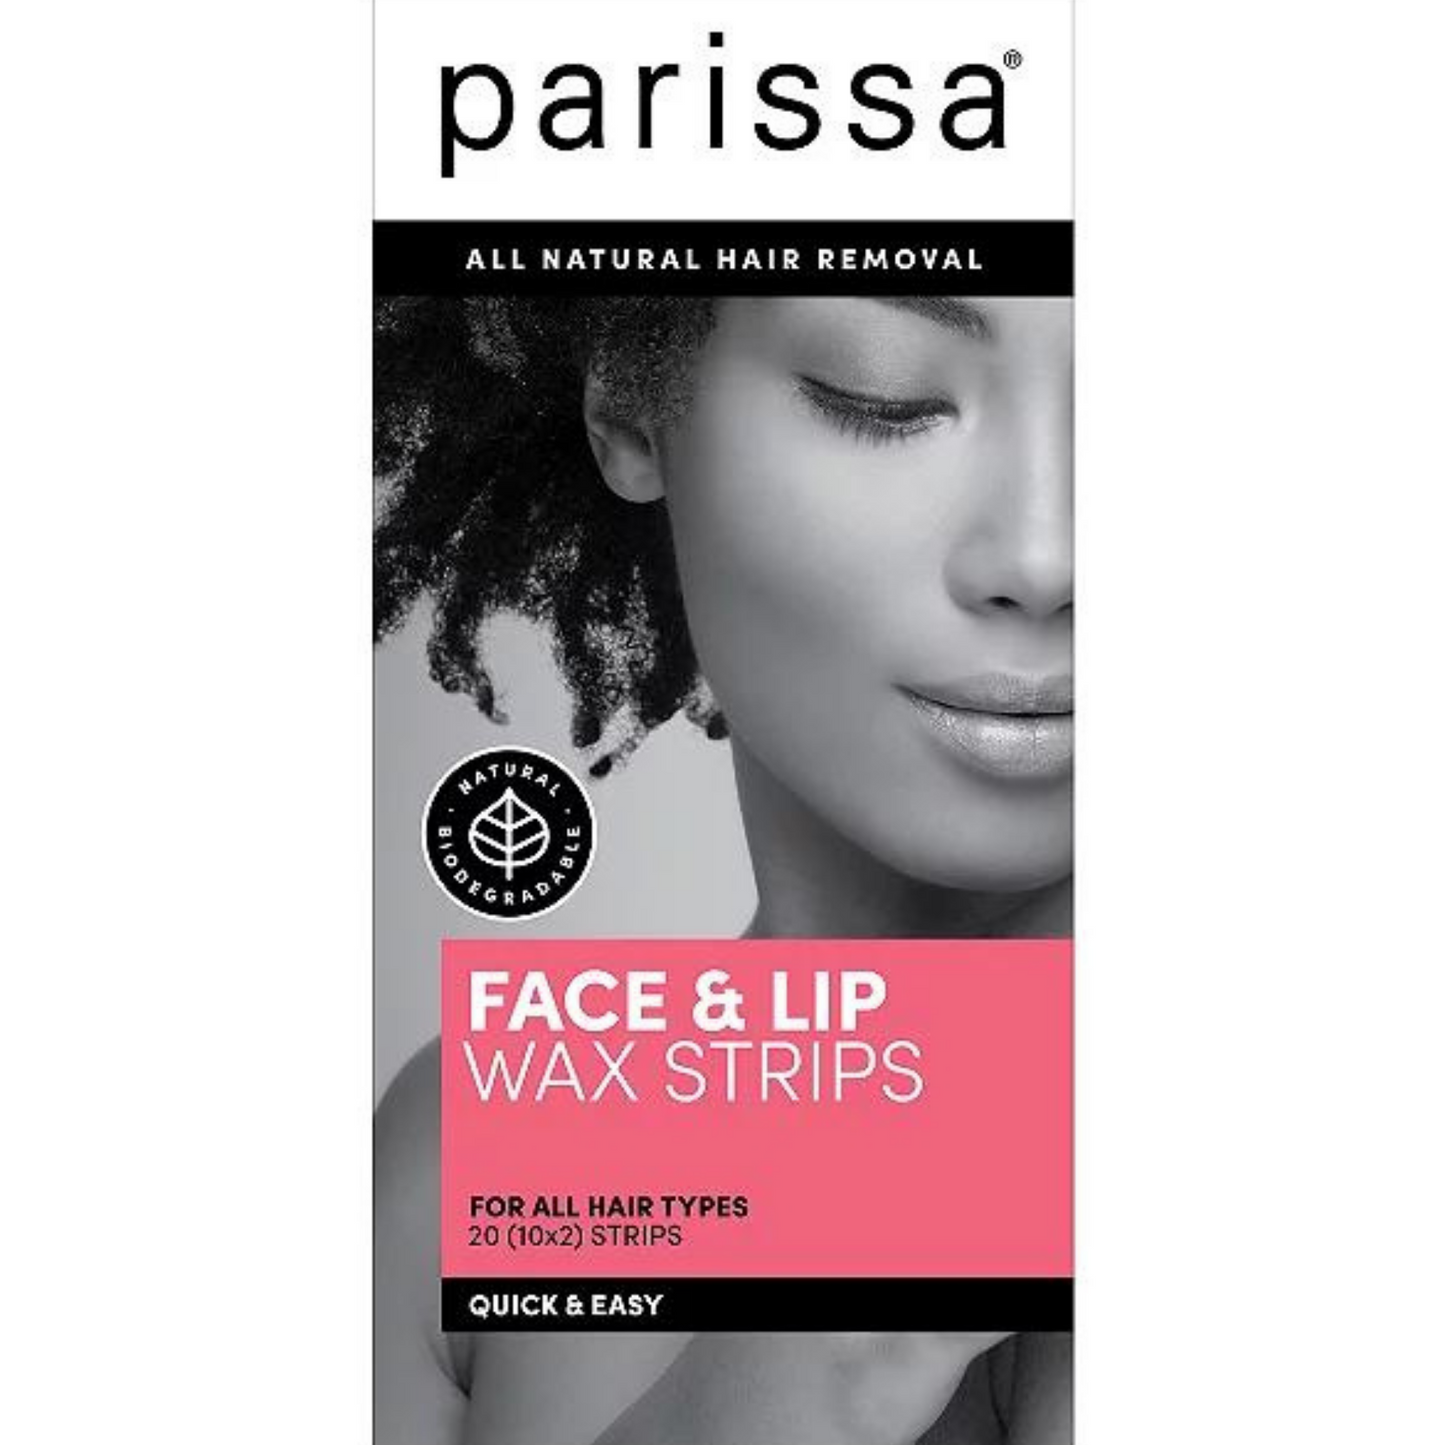 Primary Image of Face and Lip Wax Strips (20 count)